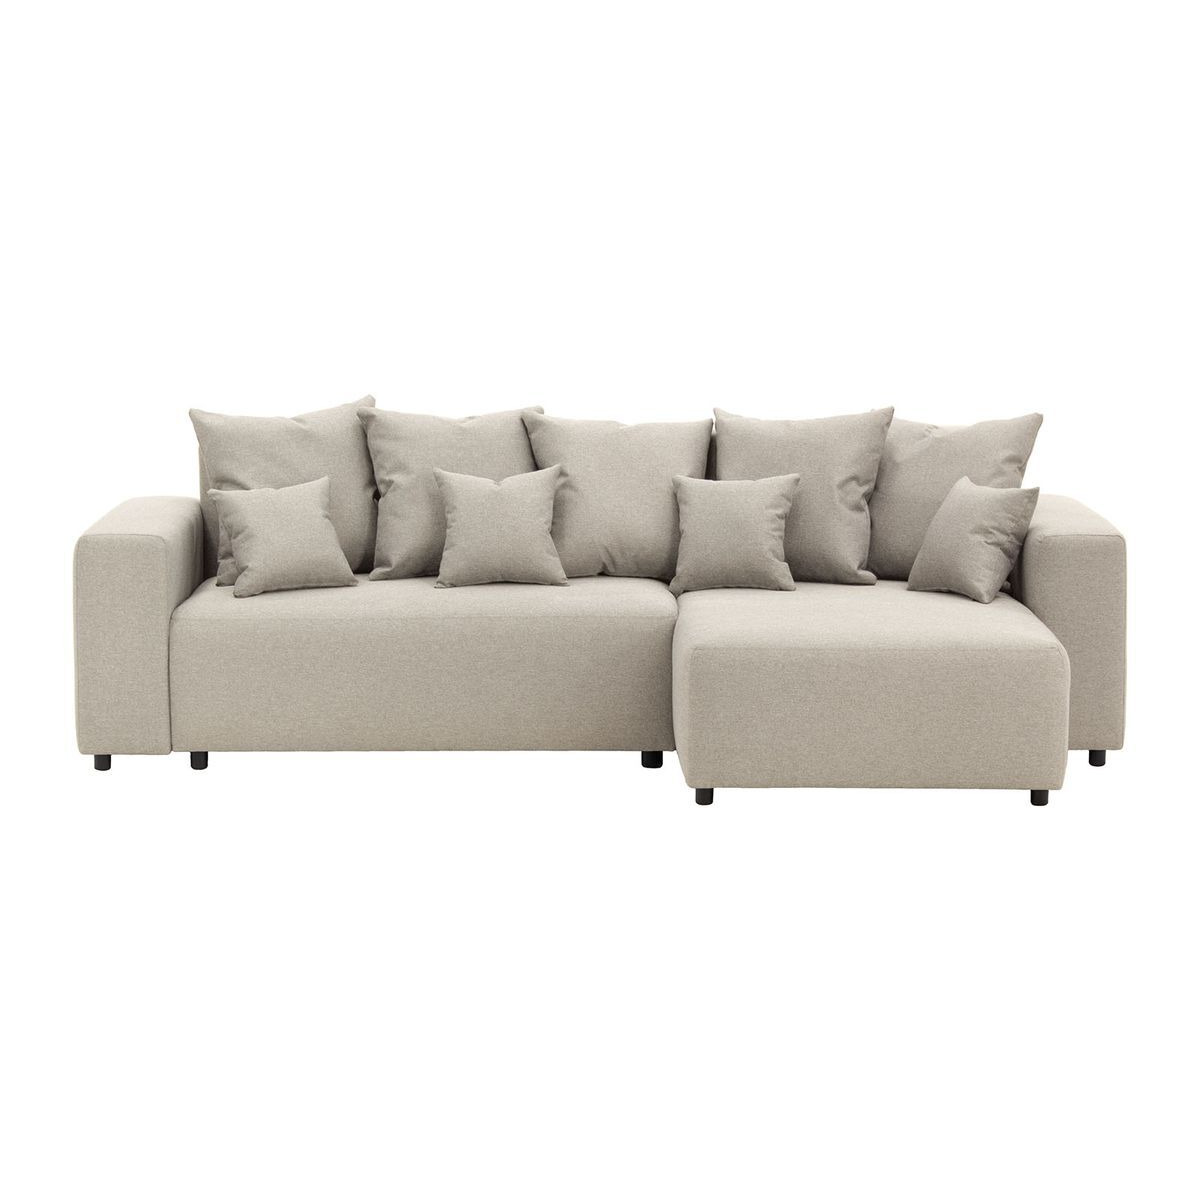 Homely Right Hand Corner Sofa Bed, boucle ivory - image 1